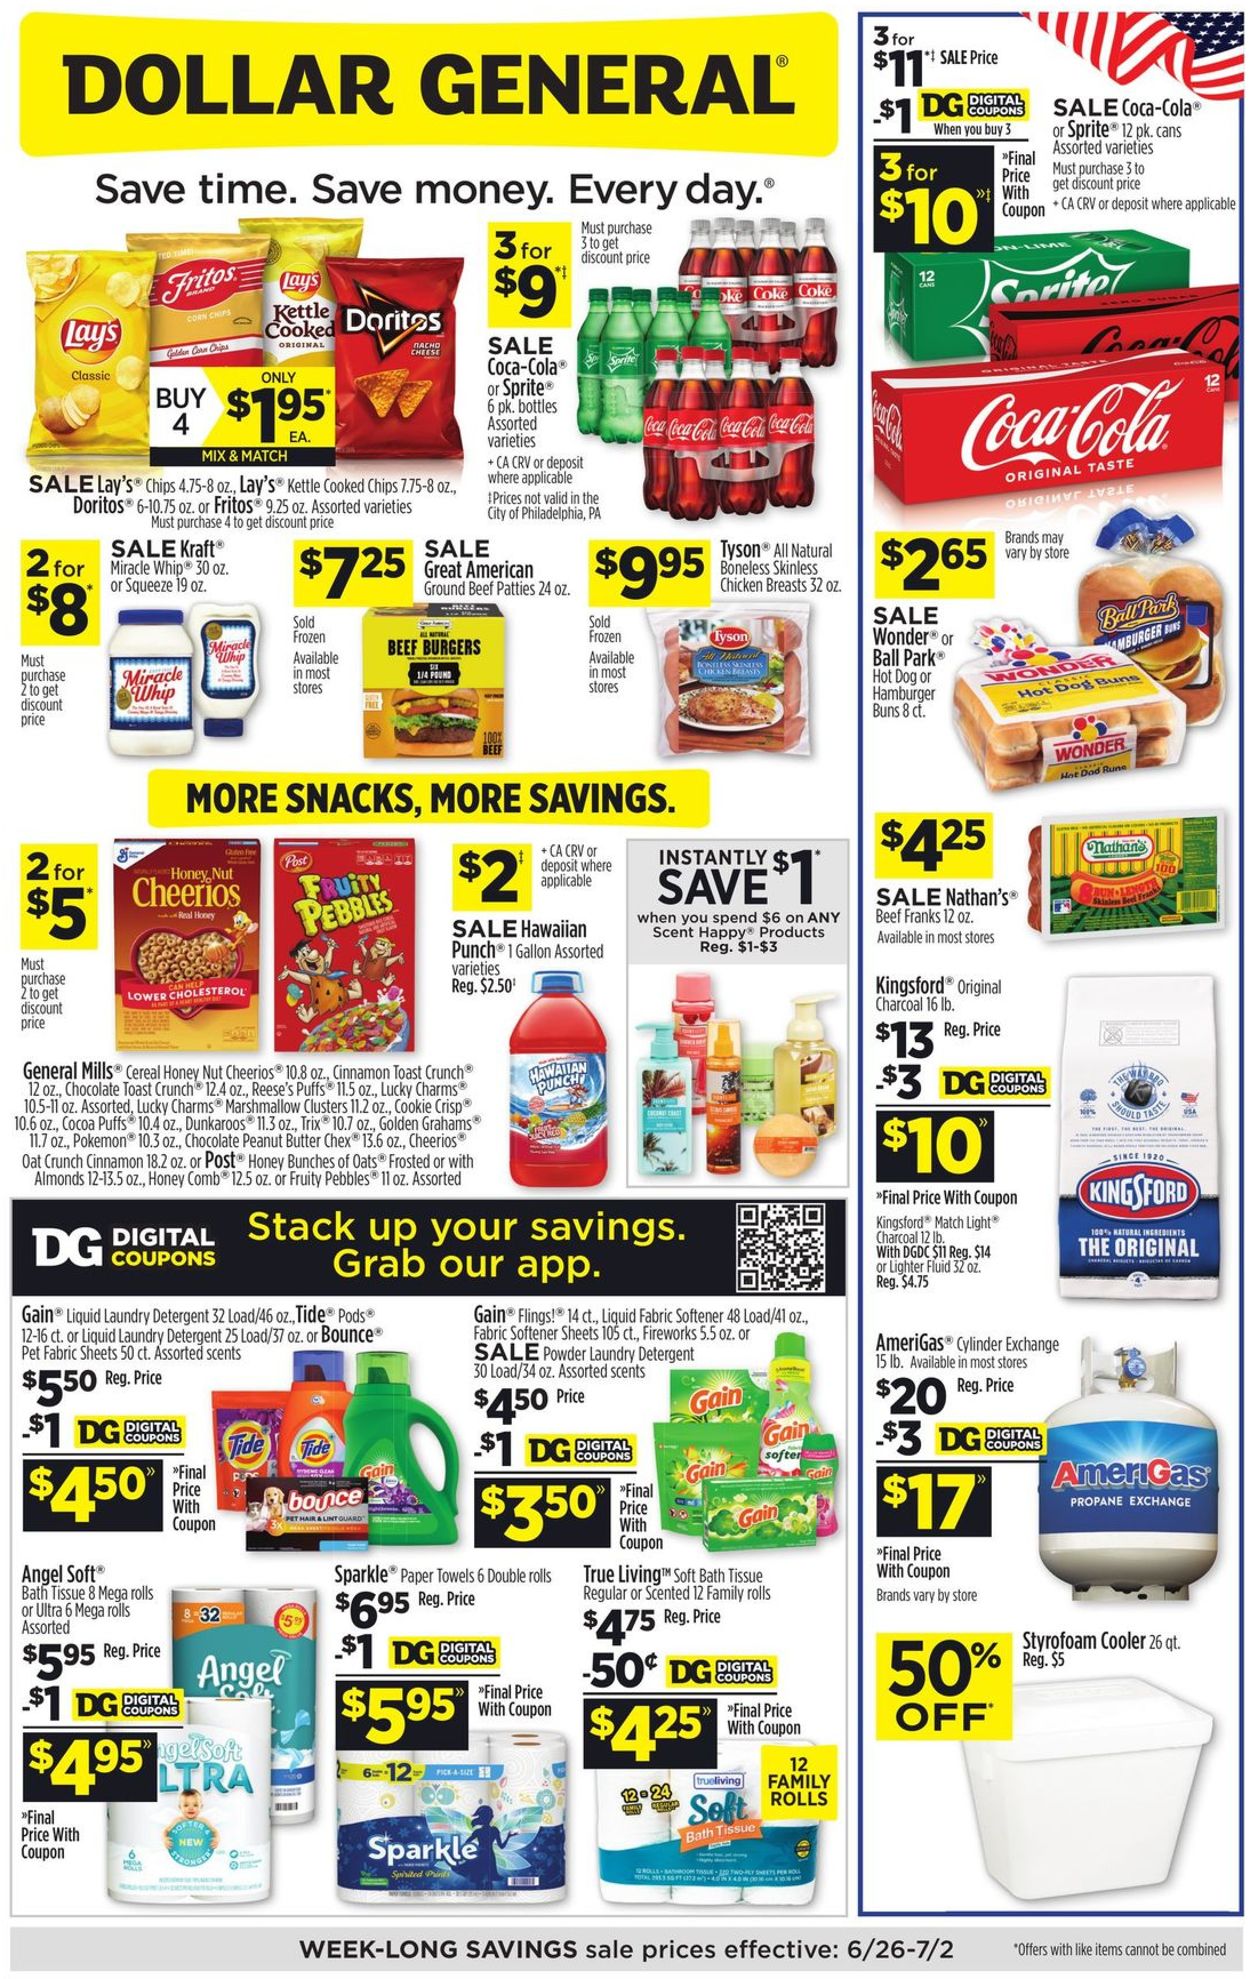 Dollar General - 4th of July Sale Weekly Ad Circular - valid 06/26-07/02/2022 (Page 3)